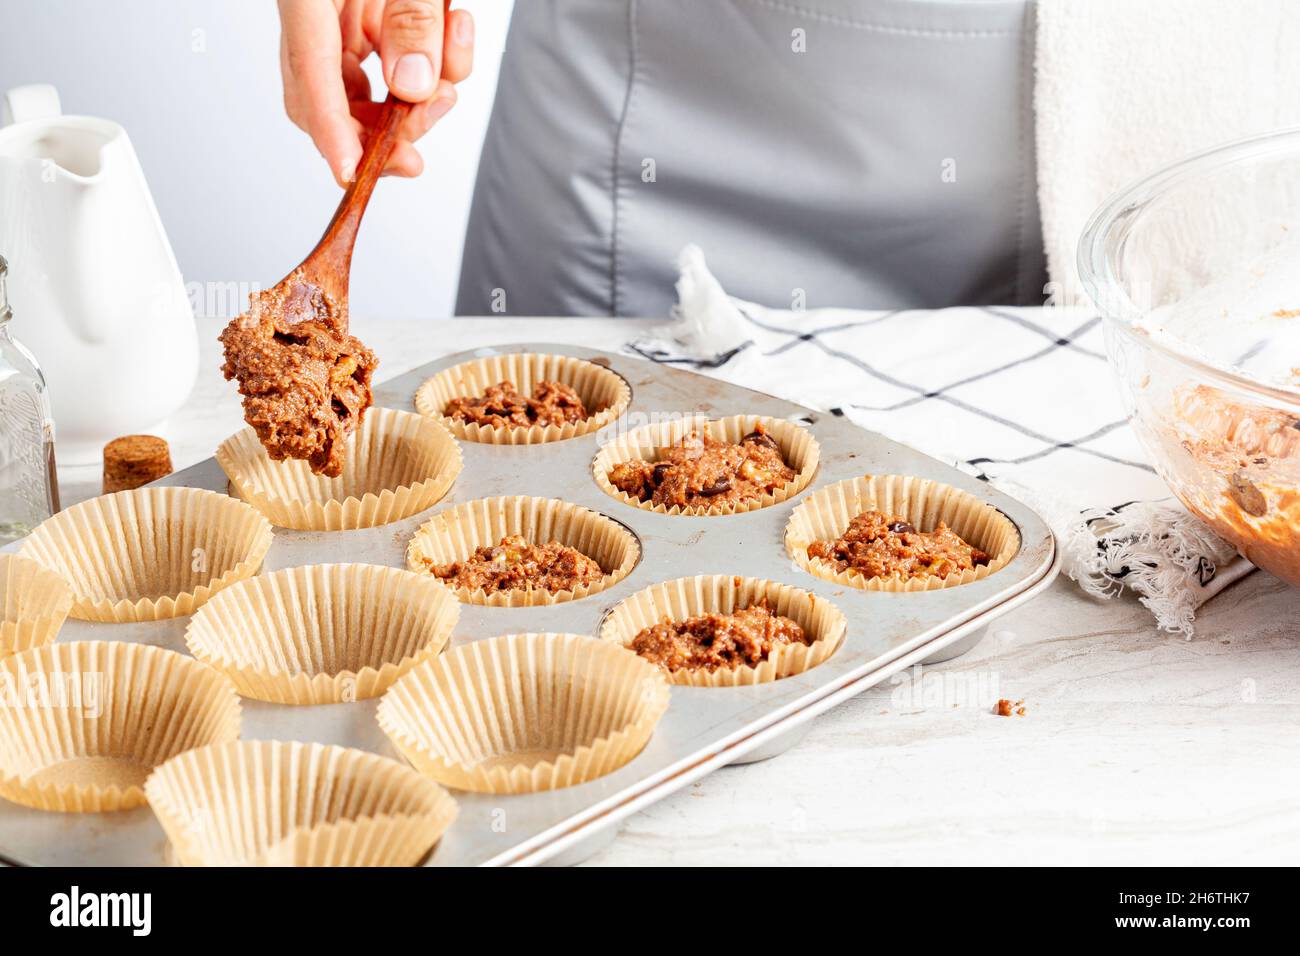 making of delicious fruit and nut cupcake on white marble countertop background. Muffin tin with liner, ingredients, and utensils are seen. A woman is Stock Photo